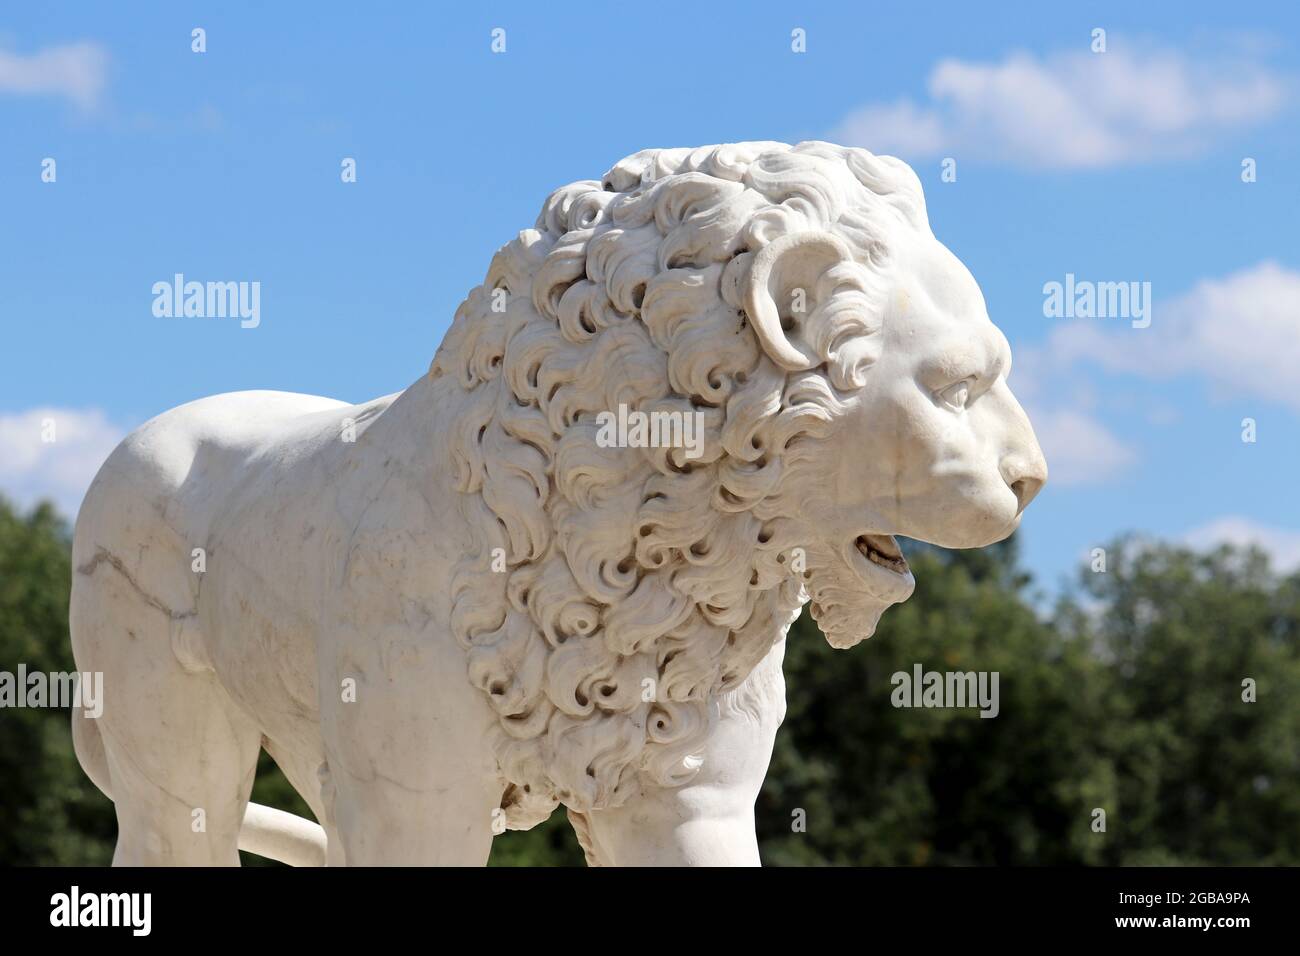 Stone lion decorating summer park. Marble sculpture on blue sky and green trees background Stock Photo